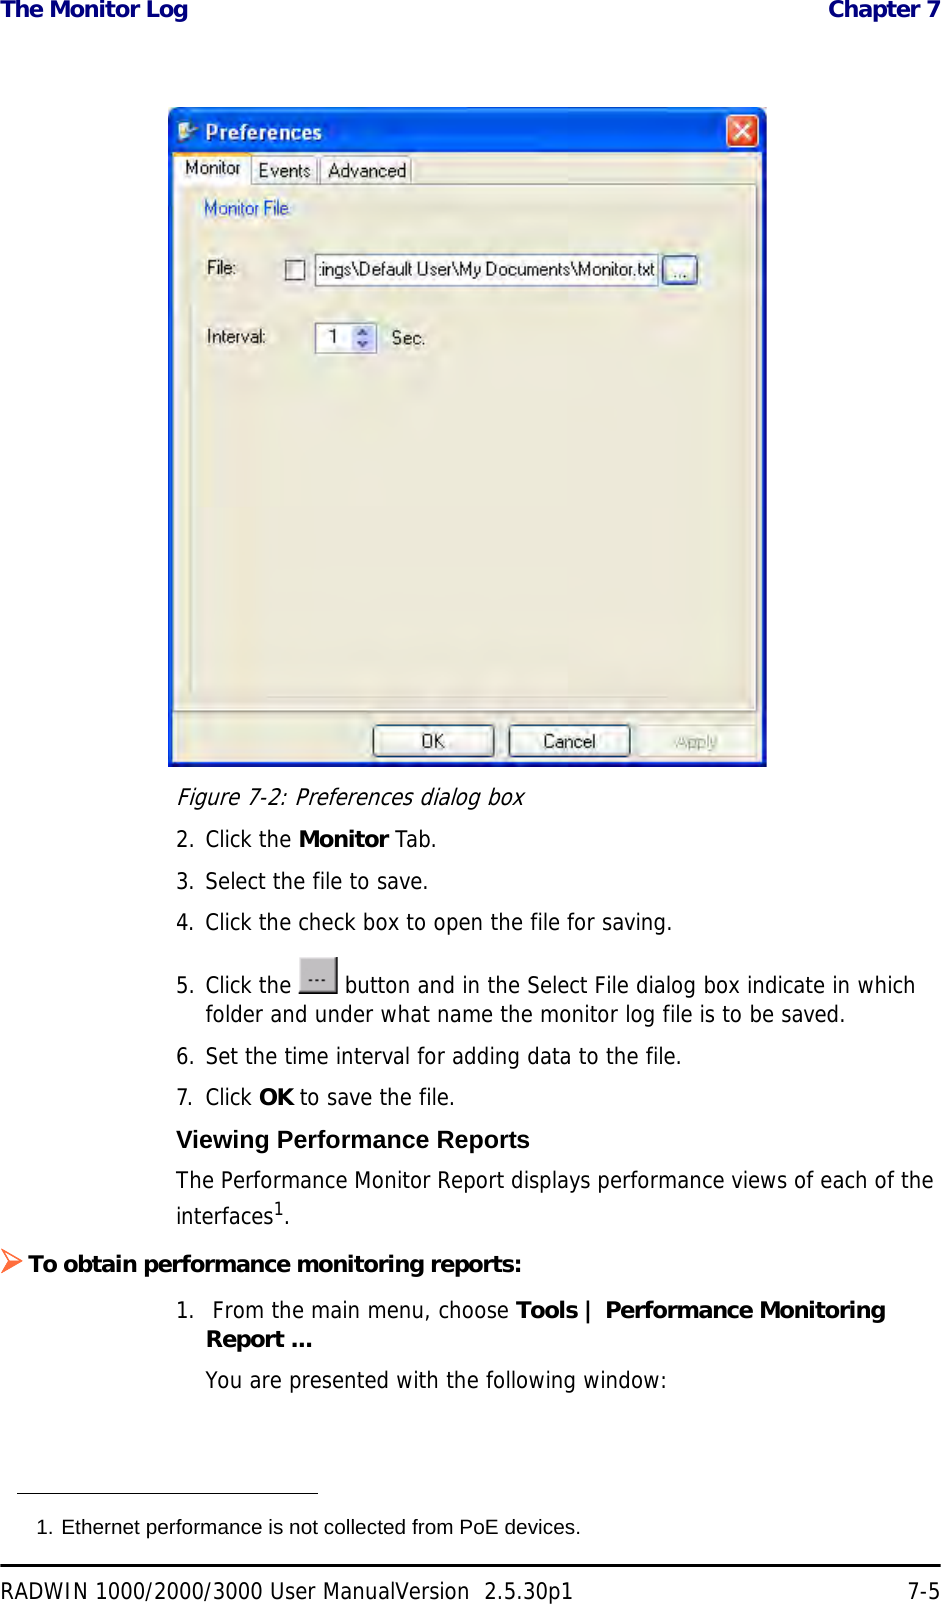 The Monitor Log  Chapter 7RADWIN 1000/2000/3000 User ManualVersion  2.5.30p1 7-5Figure 7-2: Preferences dialog box2. Click the Monitor Tab.3. Select the file to save.4. Click the check box to open the file for saving.5. Click the   button and in the Select File dialog box indicate in which folder and under what name the monitor log file is to be saved.6. Set the time interval for adding data to the file.7. Click OK to save the file.Viewing Performance ReportsThe Performance Monitor Report displays performance views of each of the interfaces1.¾To obtain performance monitoring reports:1.  From the main menu, choose Tools | Performance Monitoring Report ...You are presented with the following window:1. Ethernet performance is not collected from PoE devices.